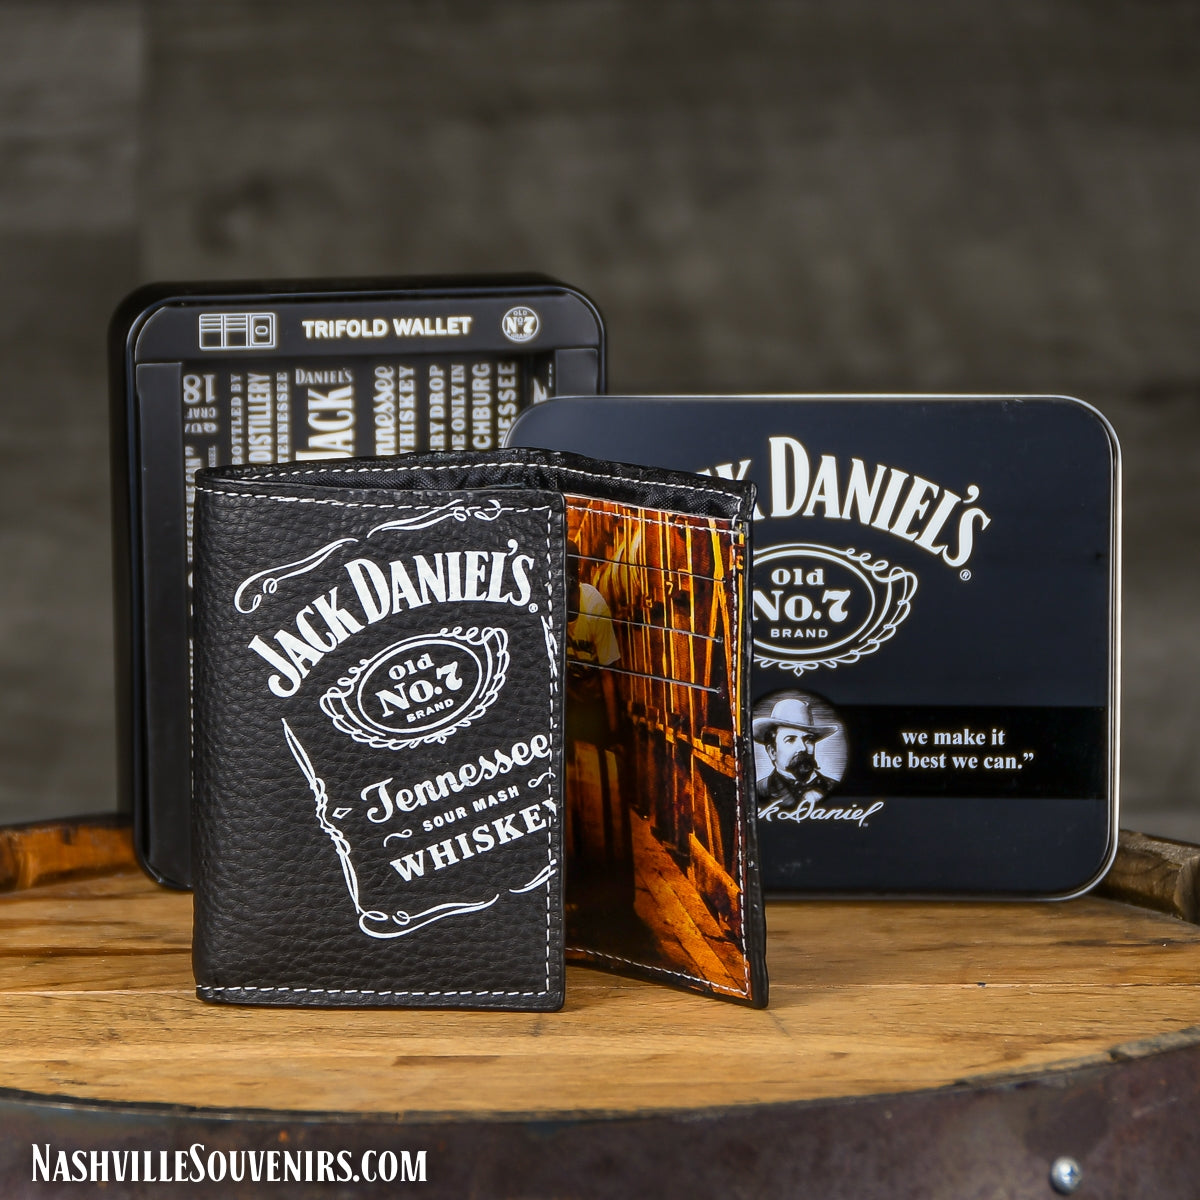 Hide your Cash in this great TriFold Jack Daniel's Tennessee Whiskey Wallet. Get one today with FREE SHIPPING on all US orders over $75! Features full color Barrel House image inside!